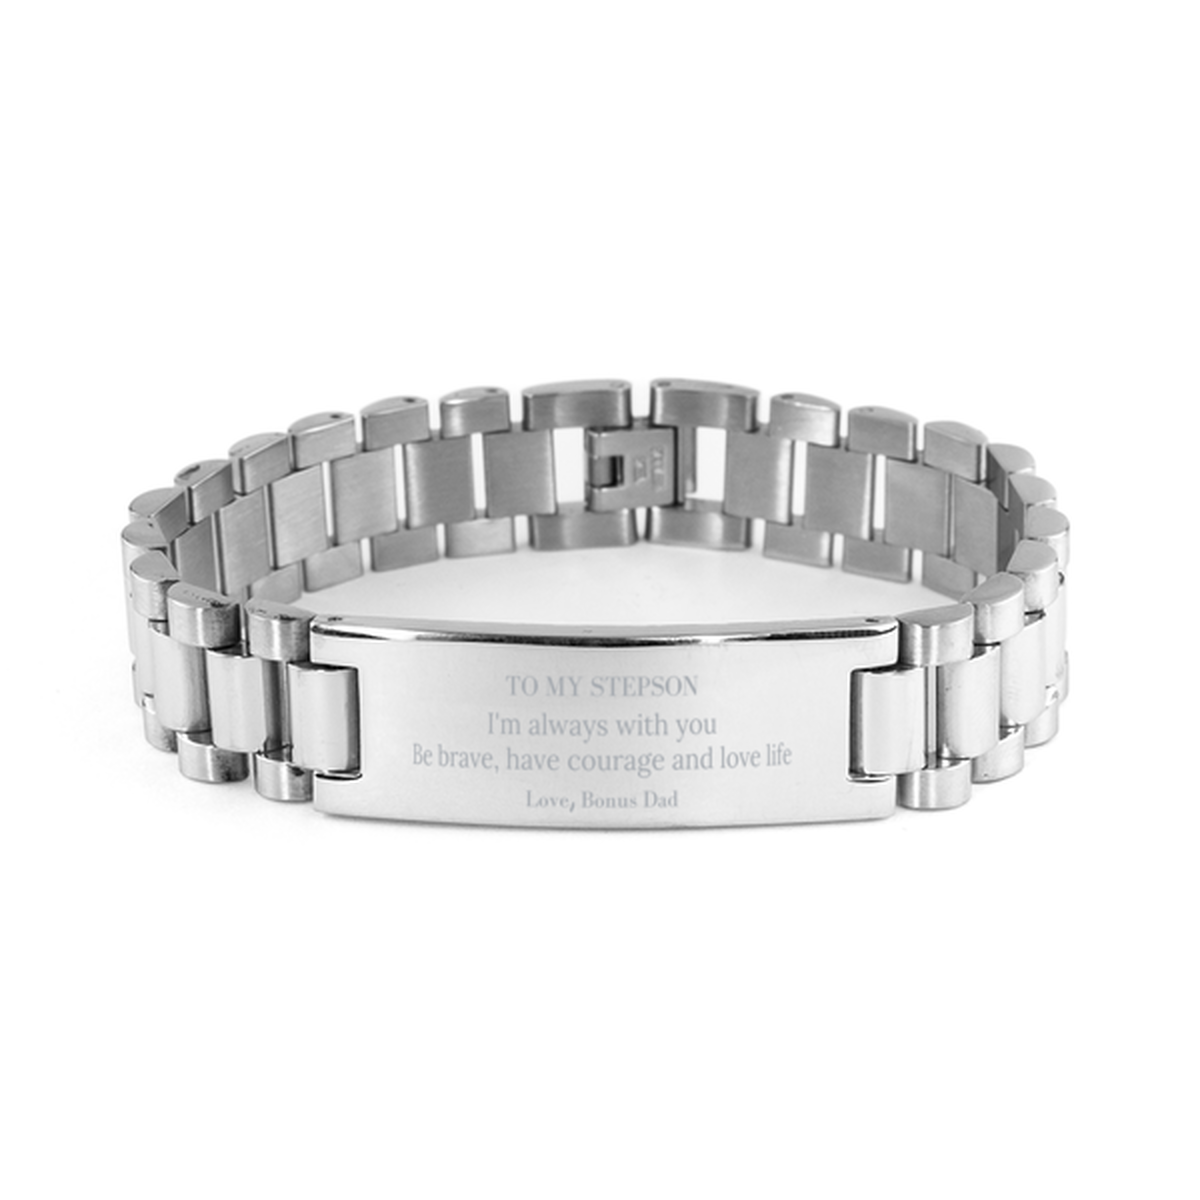 To My Stepson Gifts from Bonus Dad, Unique Ladder Stainless Steel Bracelet Inspirational Christmas Birthday Graduation Gifts for Stepson I'm always with you. Be brave, have courage and love life. Love, Bonus Dad